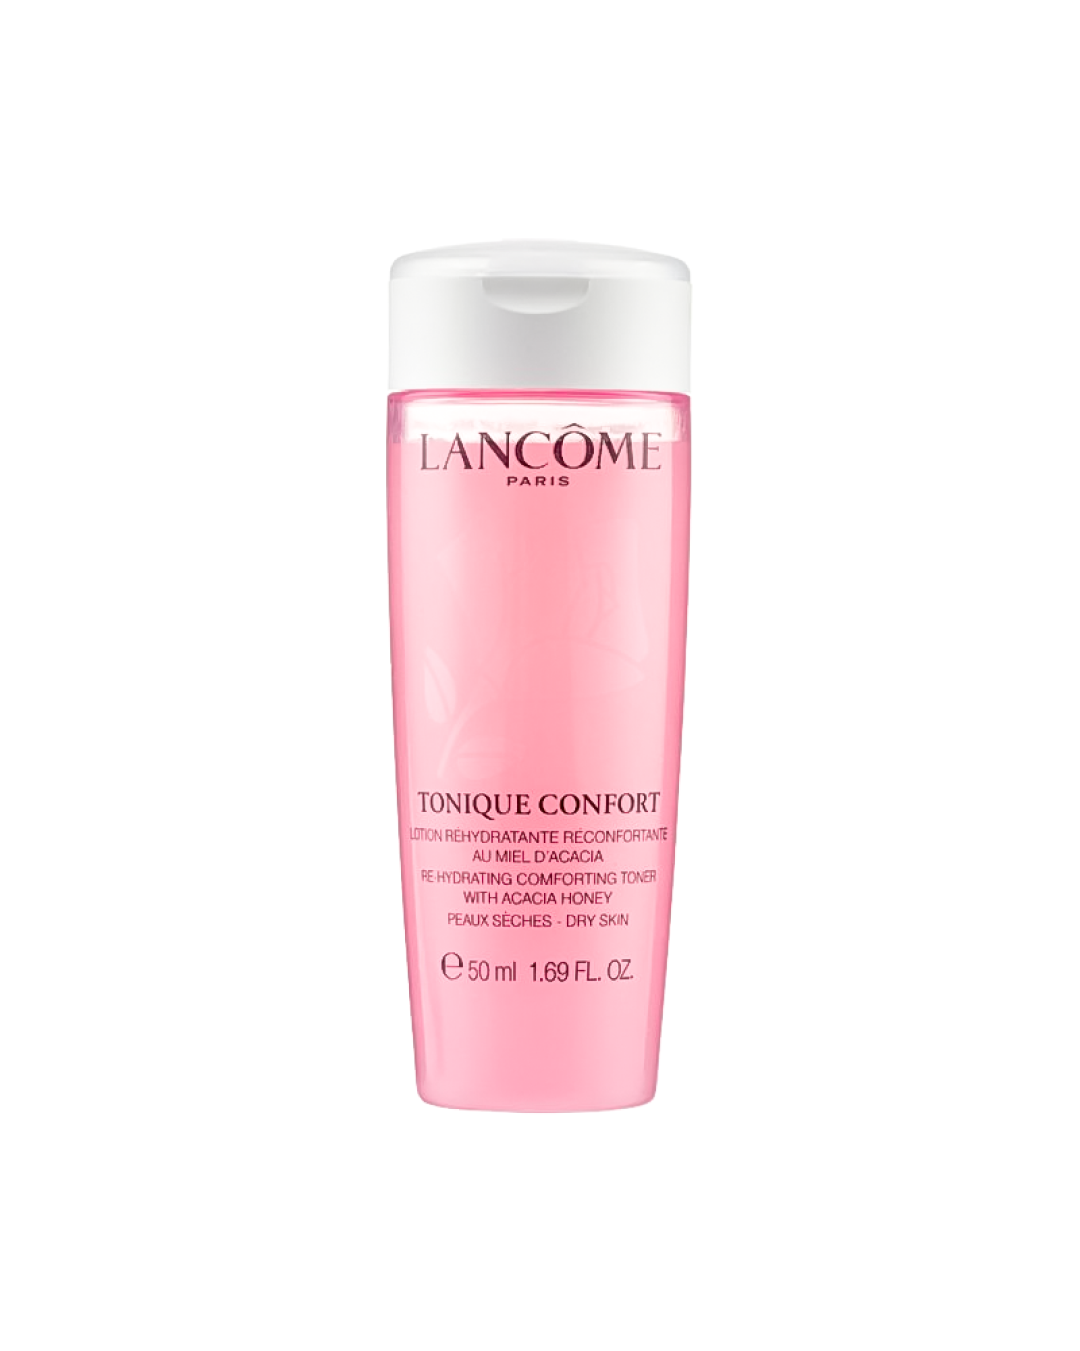 Lancome Tonique Confort Re-Hydrating Comforting Toner with Acacia Honey - Dry Skin (50ml) - Best Buy World Philippines